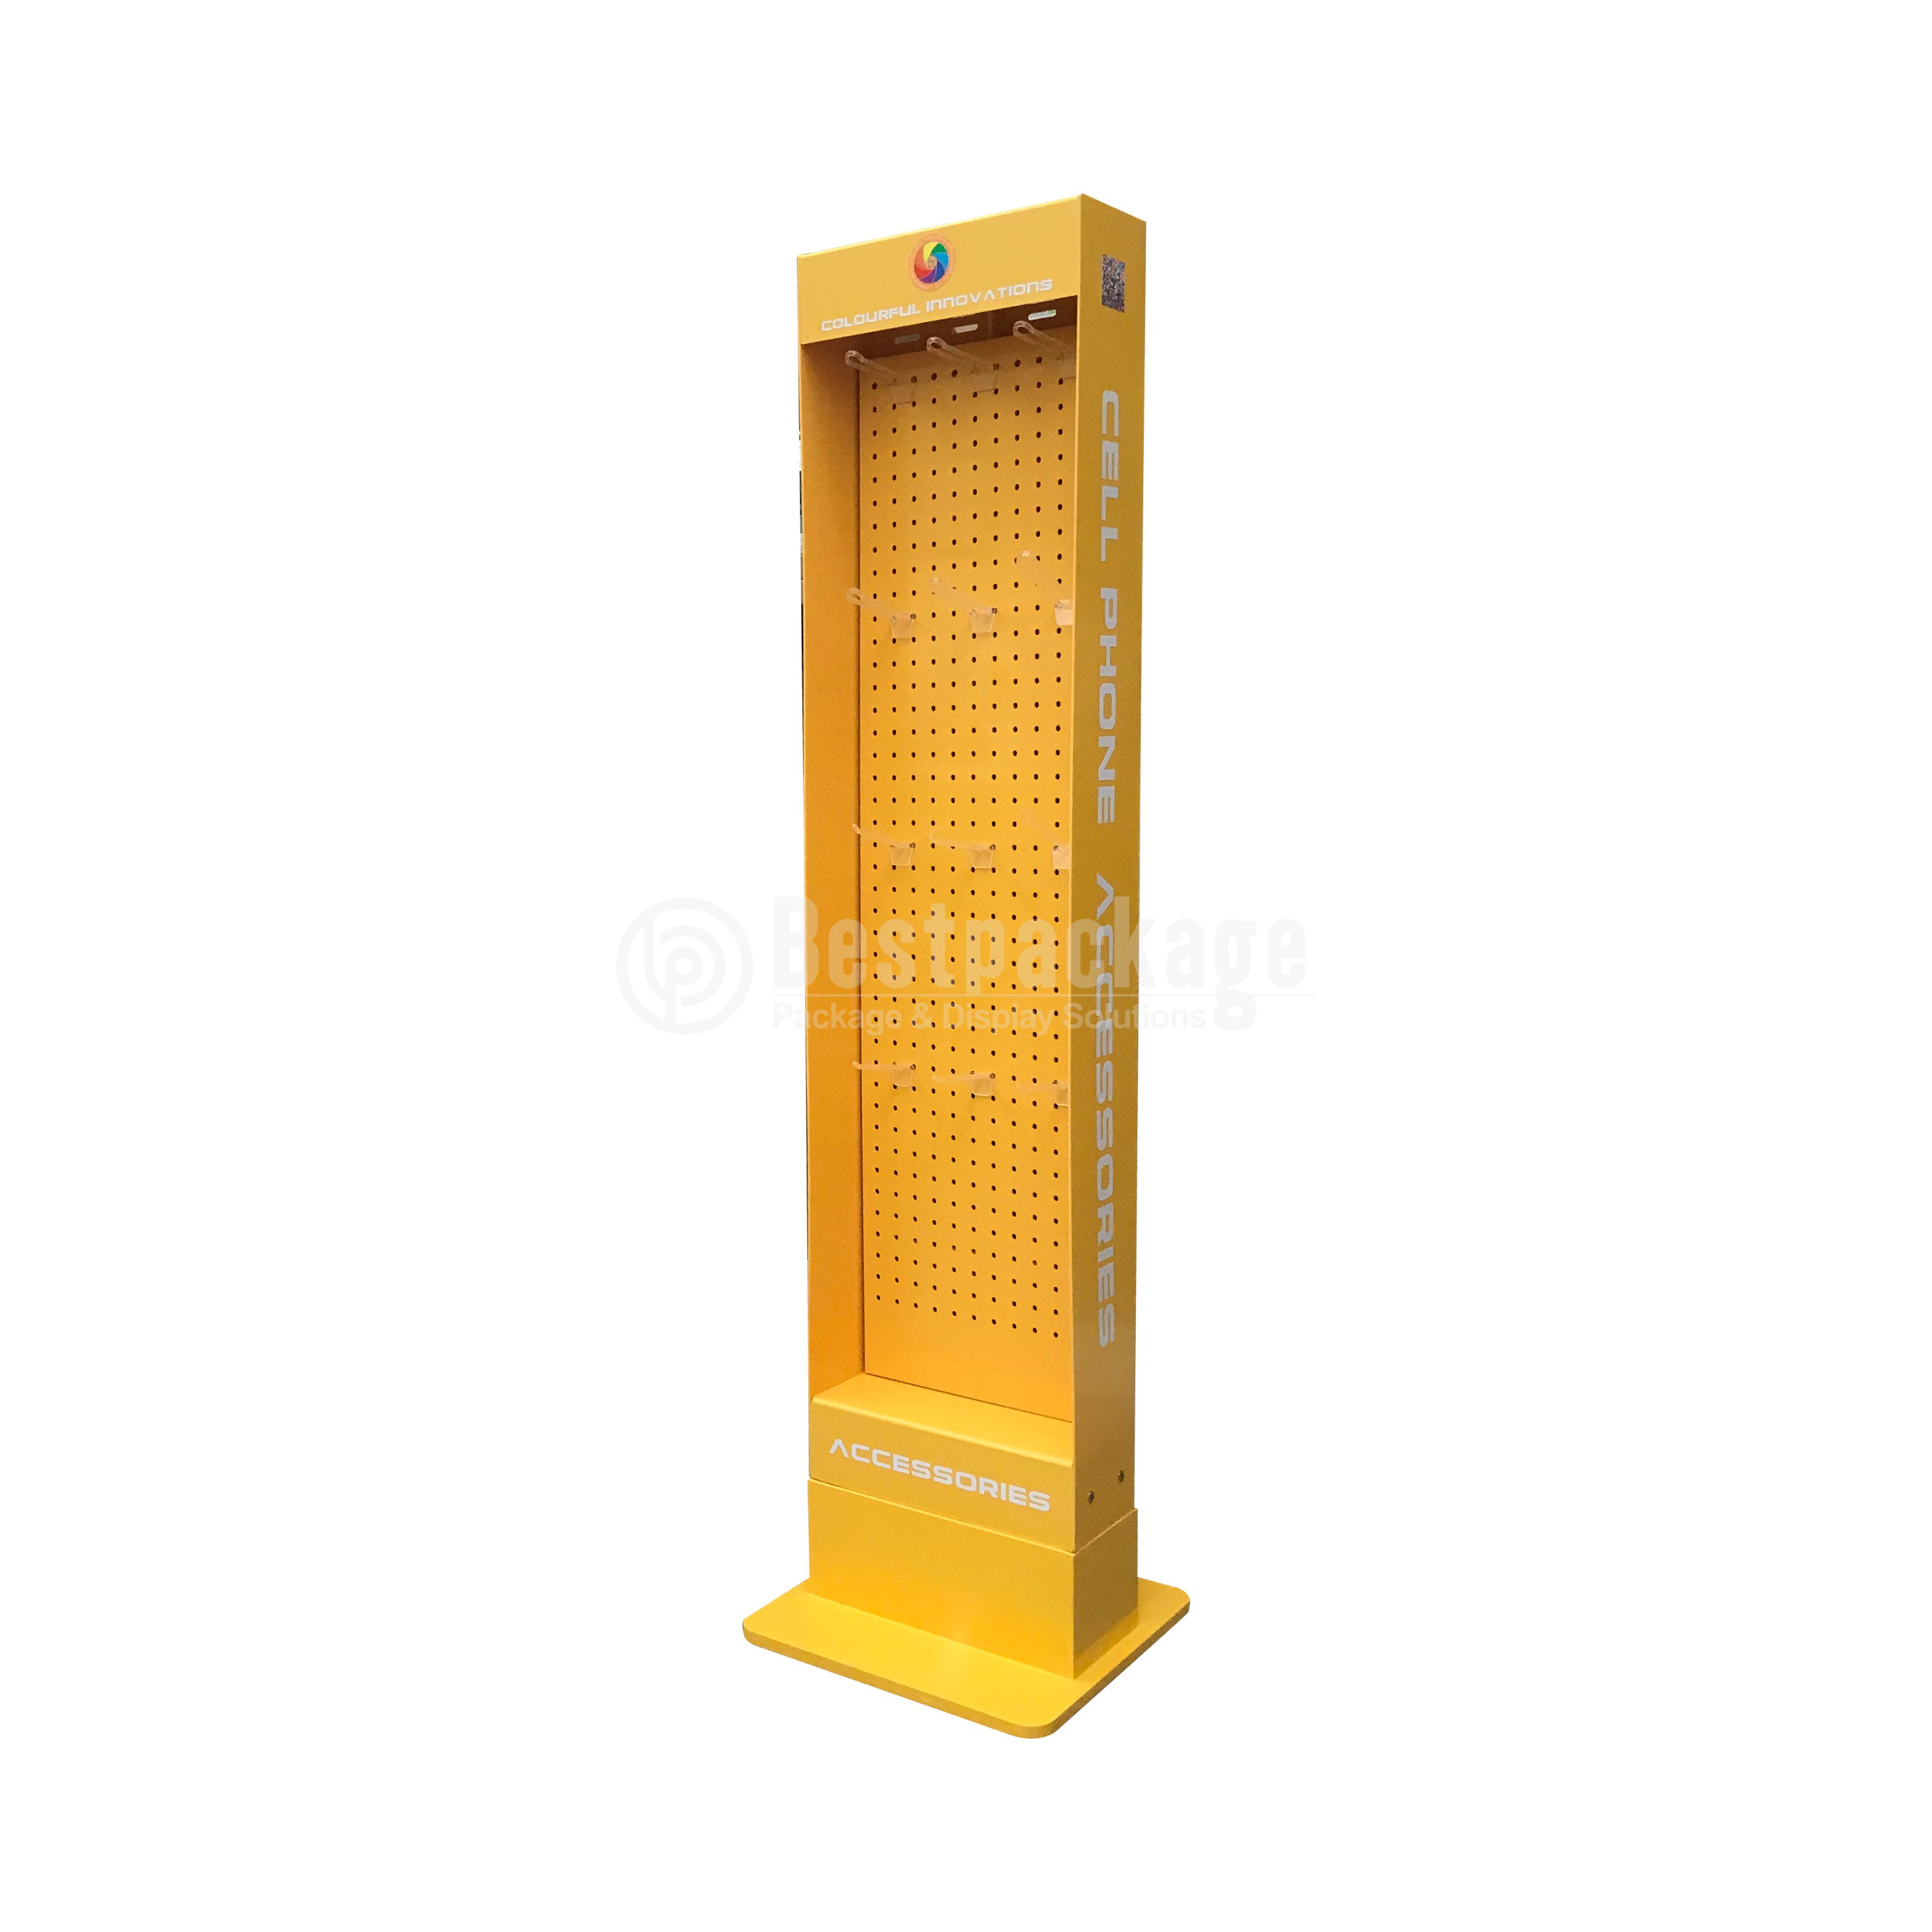 DPF01005 Plastic Pegboard Display, Small Electronic Display, Accessory Display, Spinning Floor Display